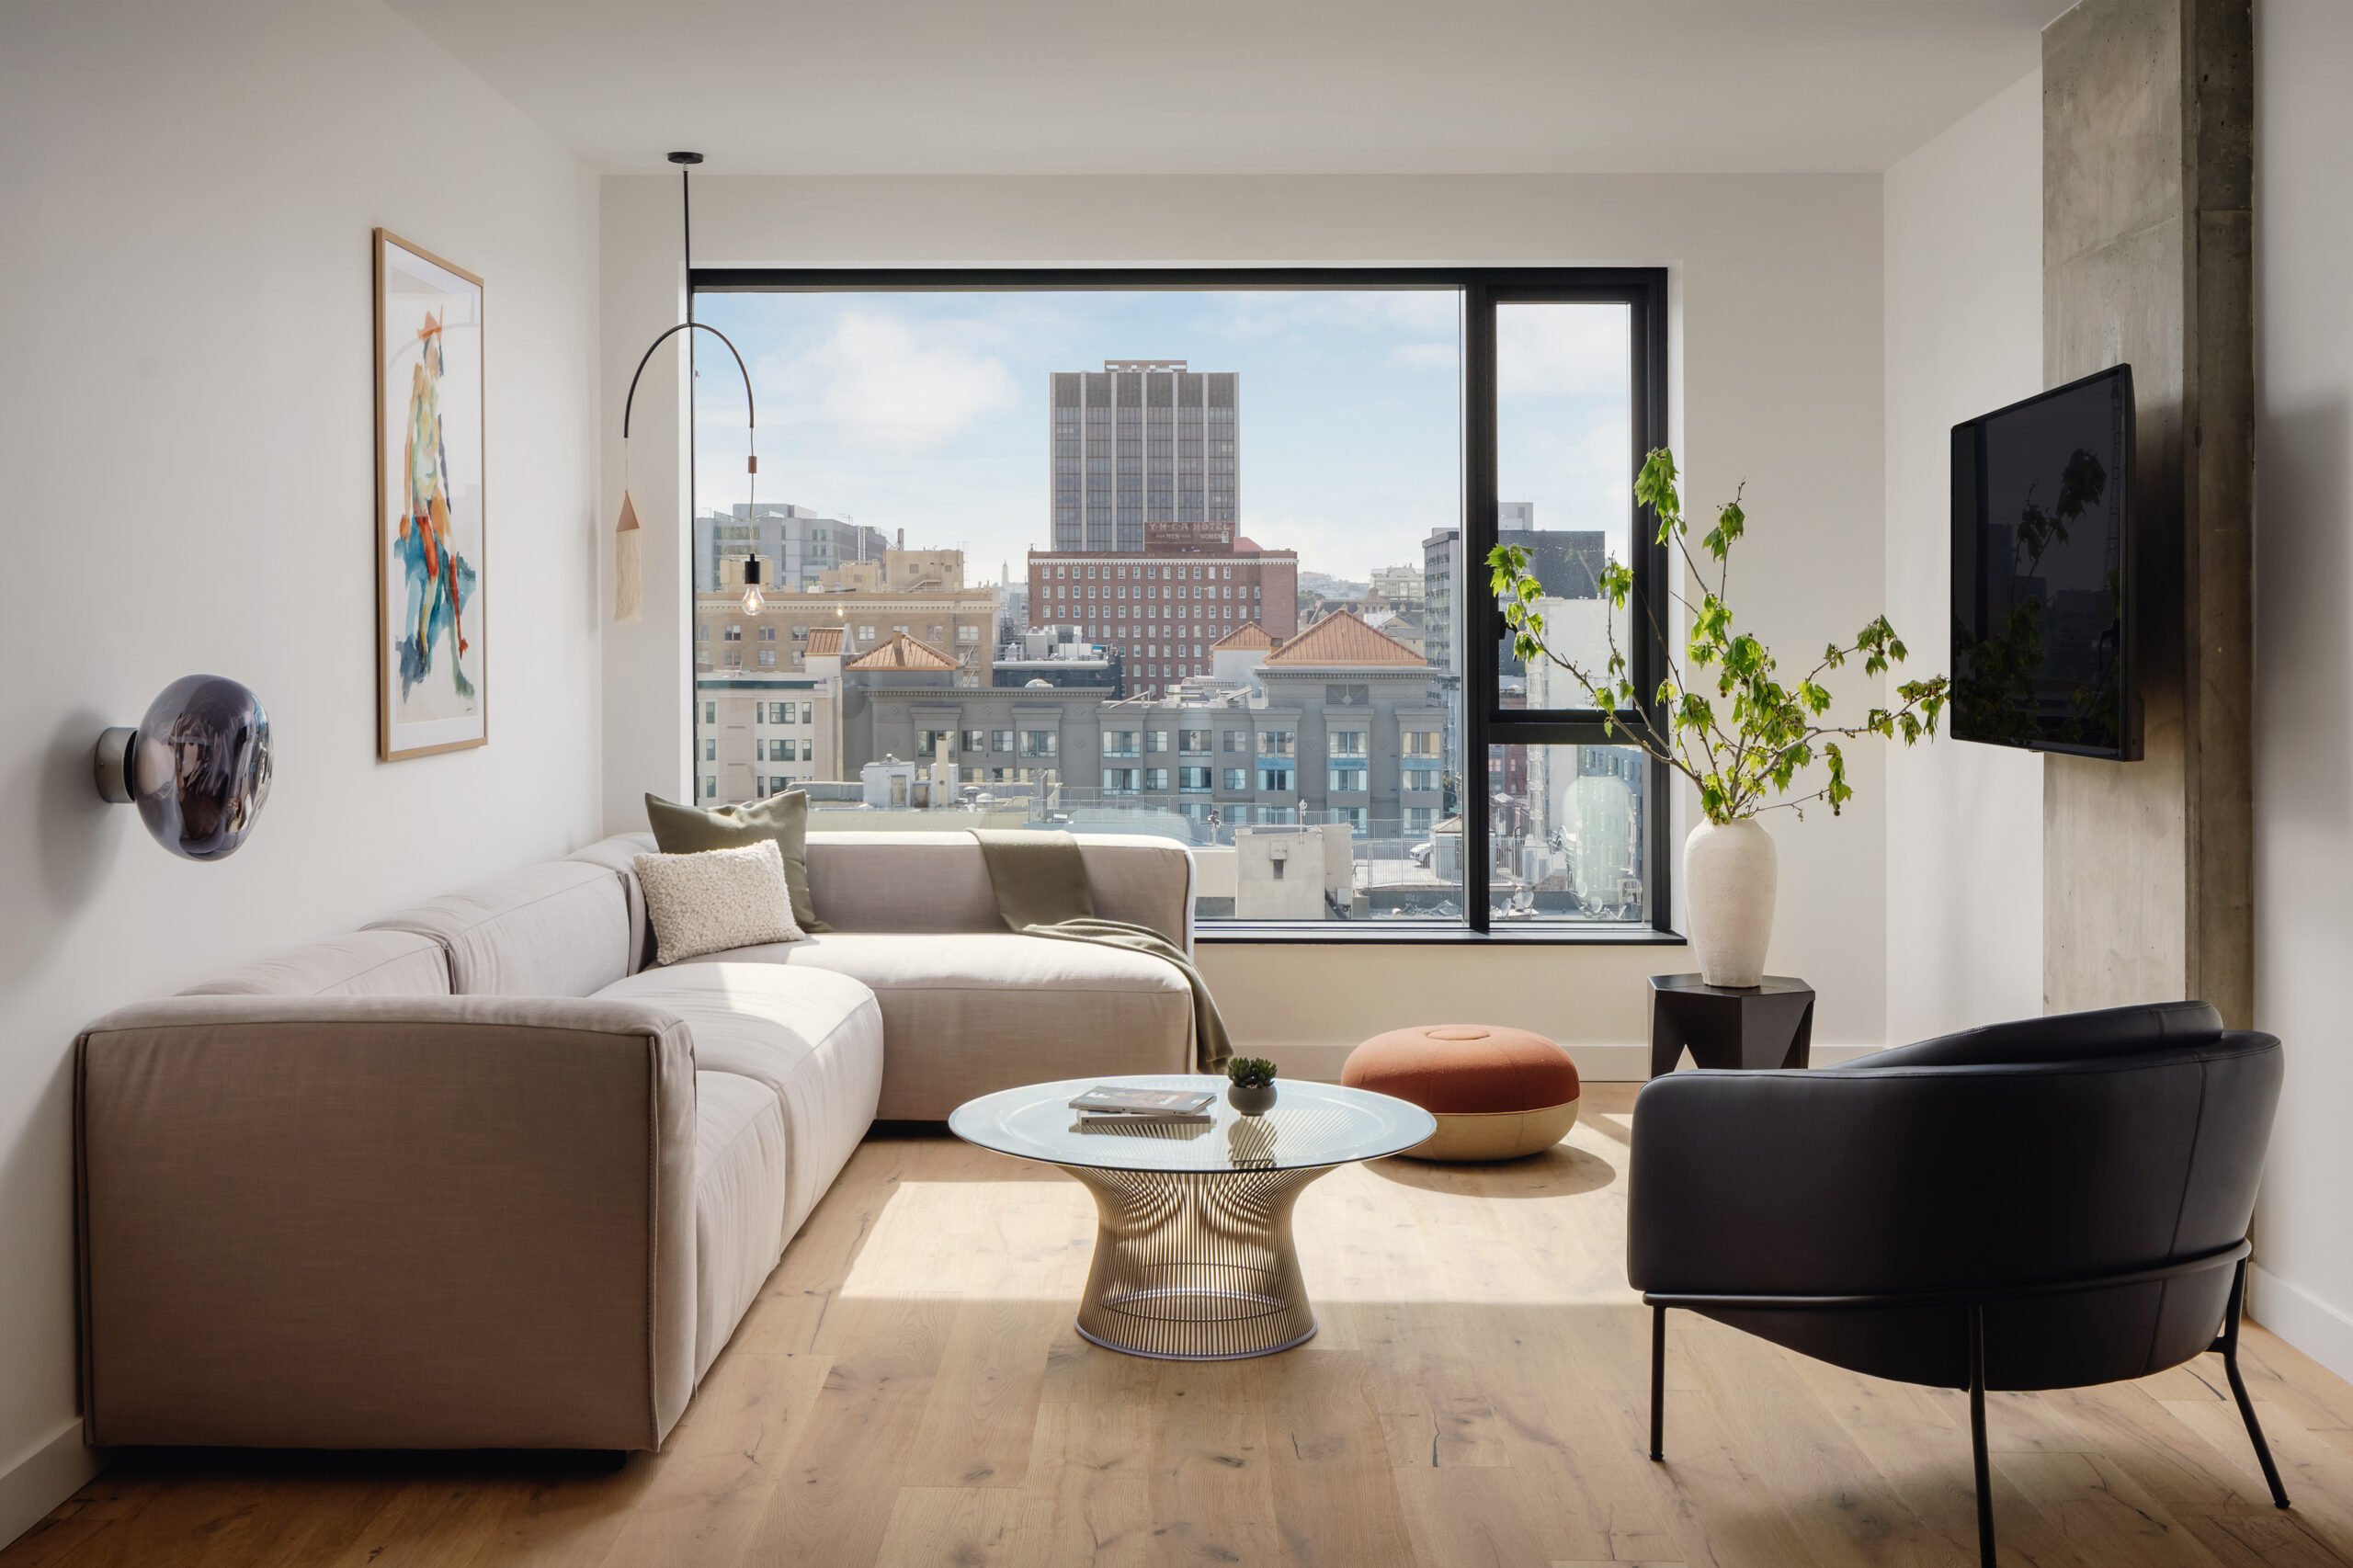 A L-shaped couch positioned near the glass window offers a wonderful view of the city.